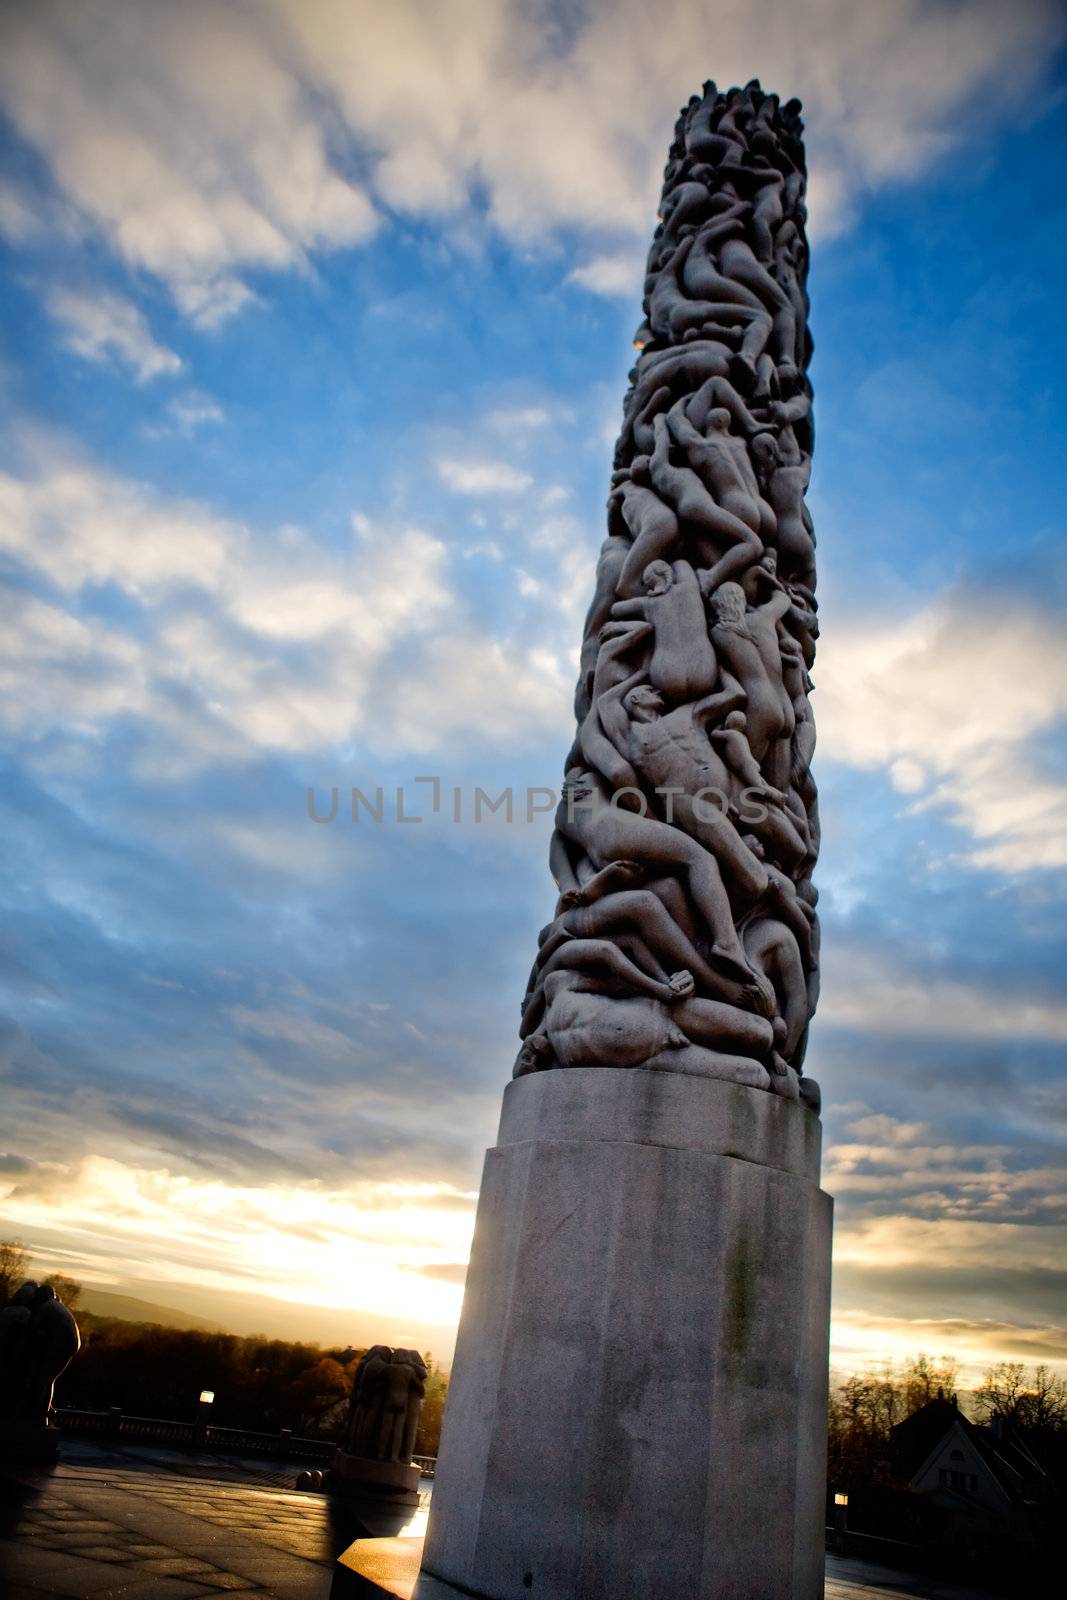 The monolith in the vigeland sculpture park in Oslo, Norway